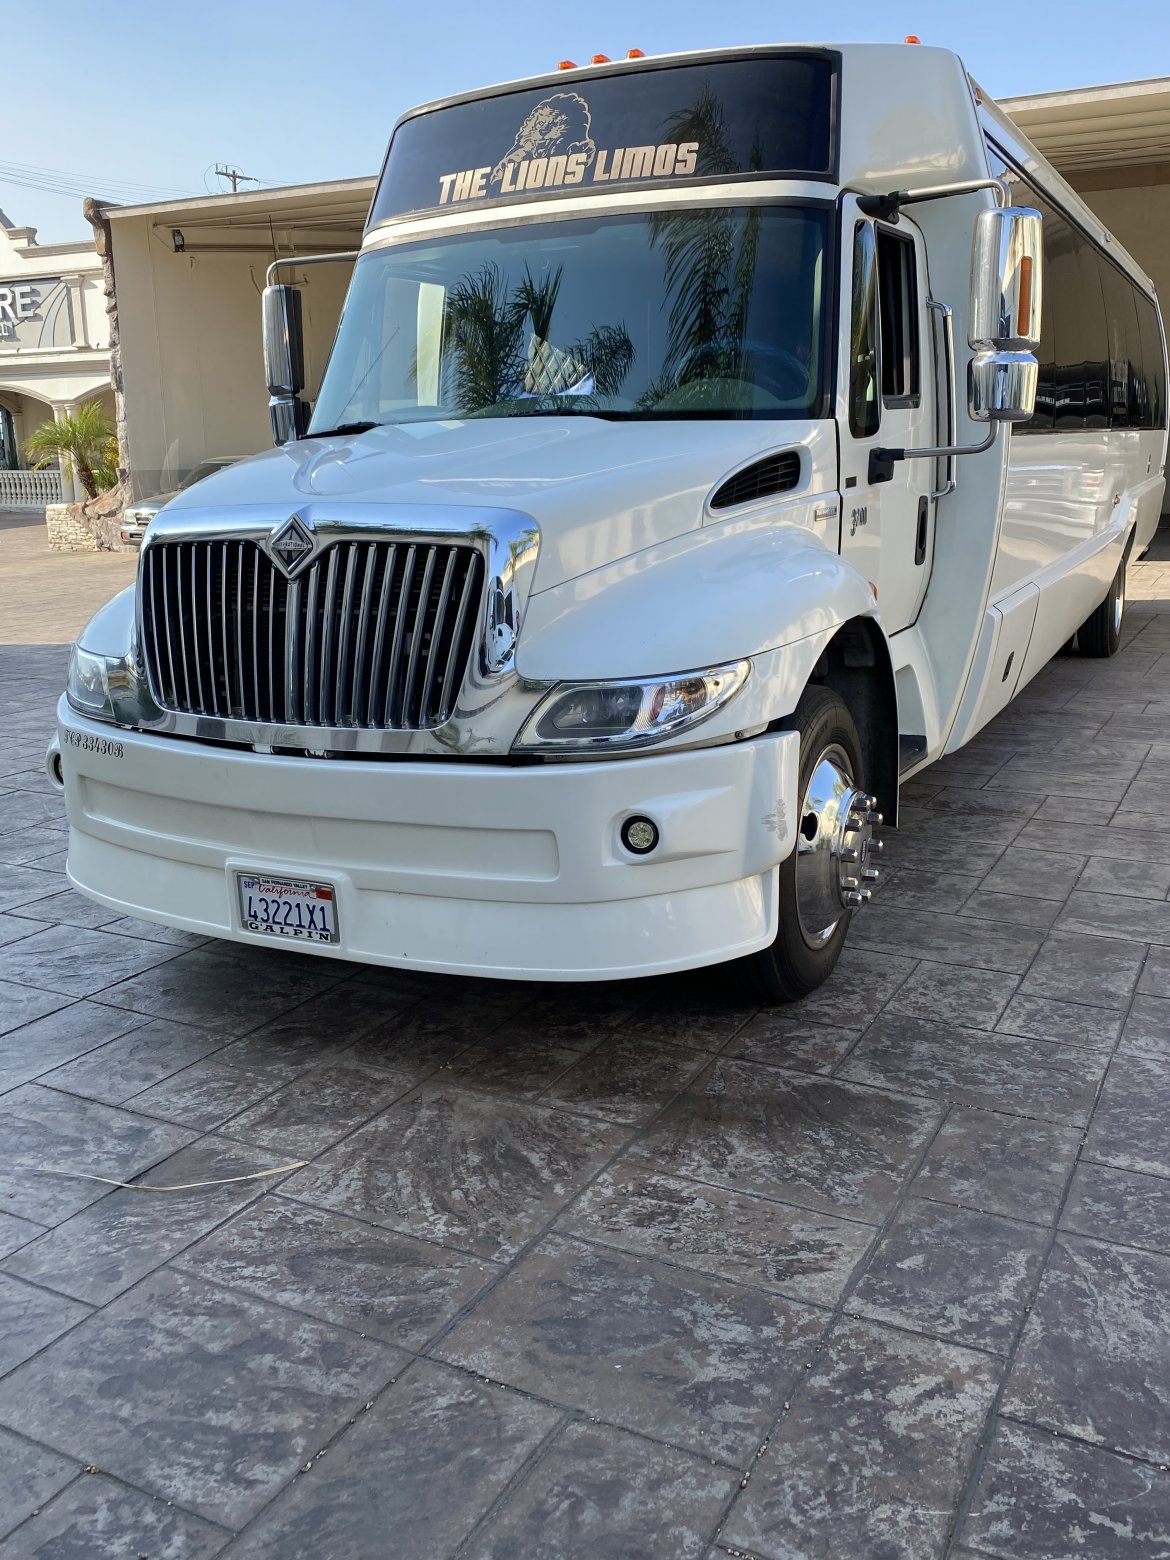 Limo Bus for sale: 2009 International 3200 by LIMOS BY MOONLIGHT